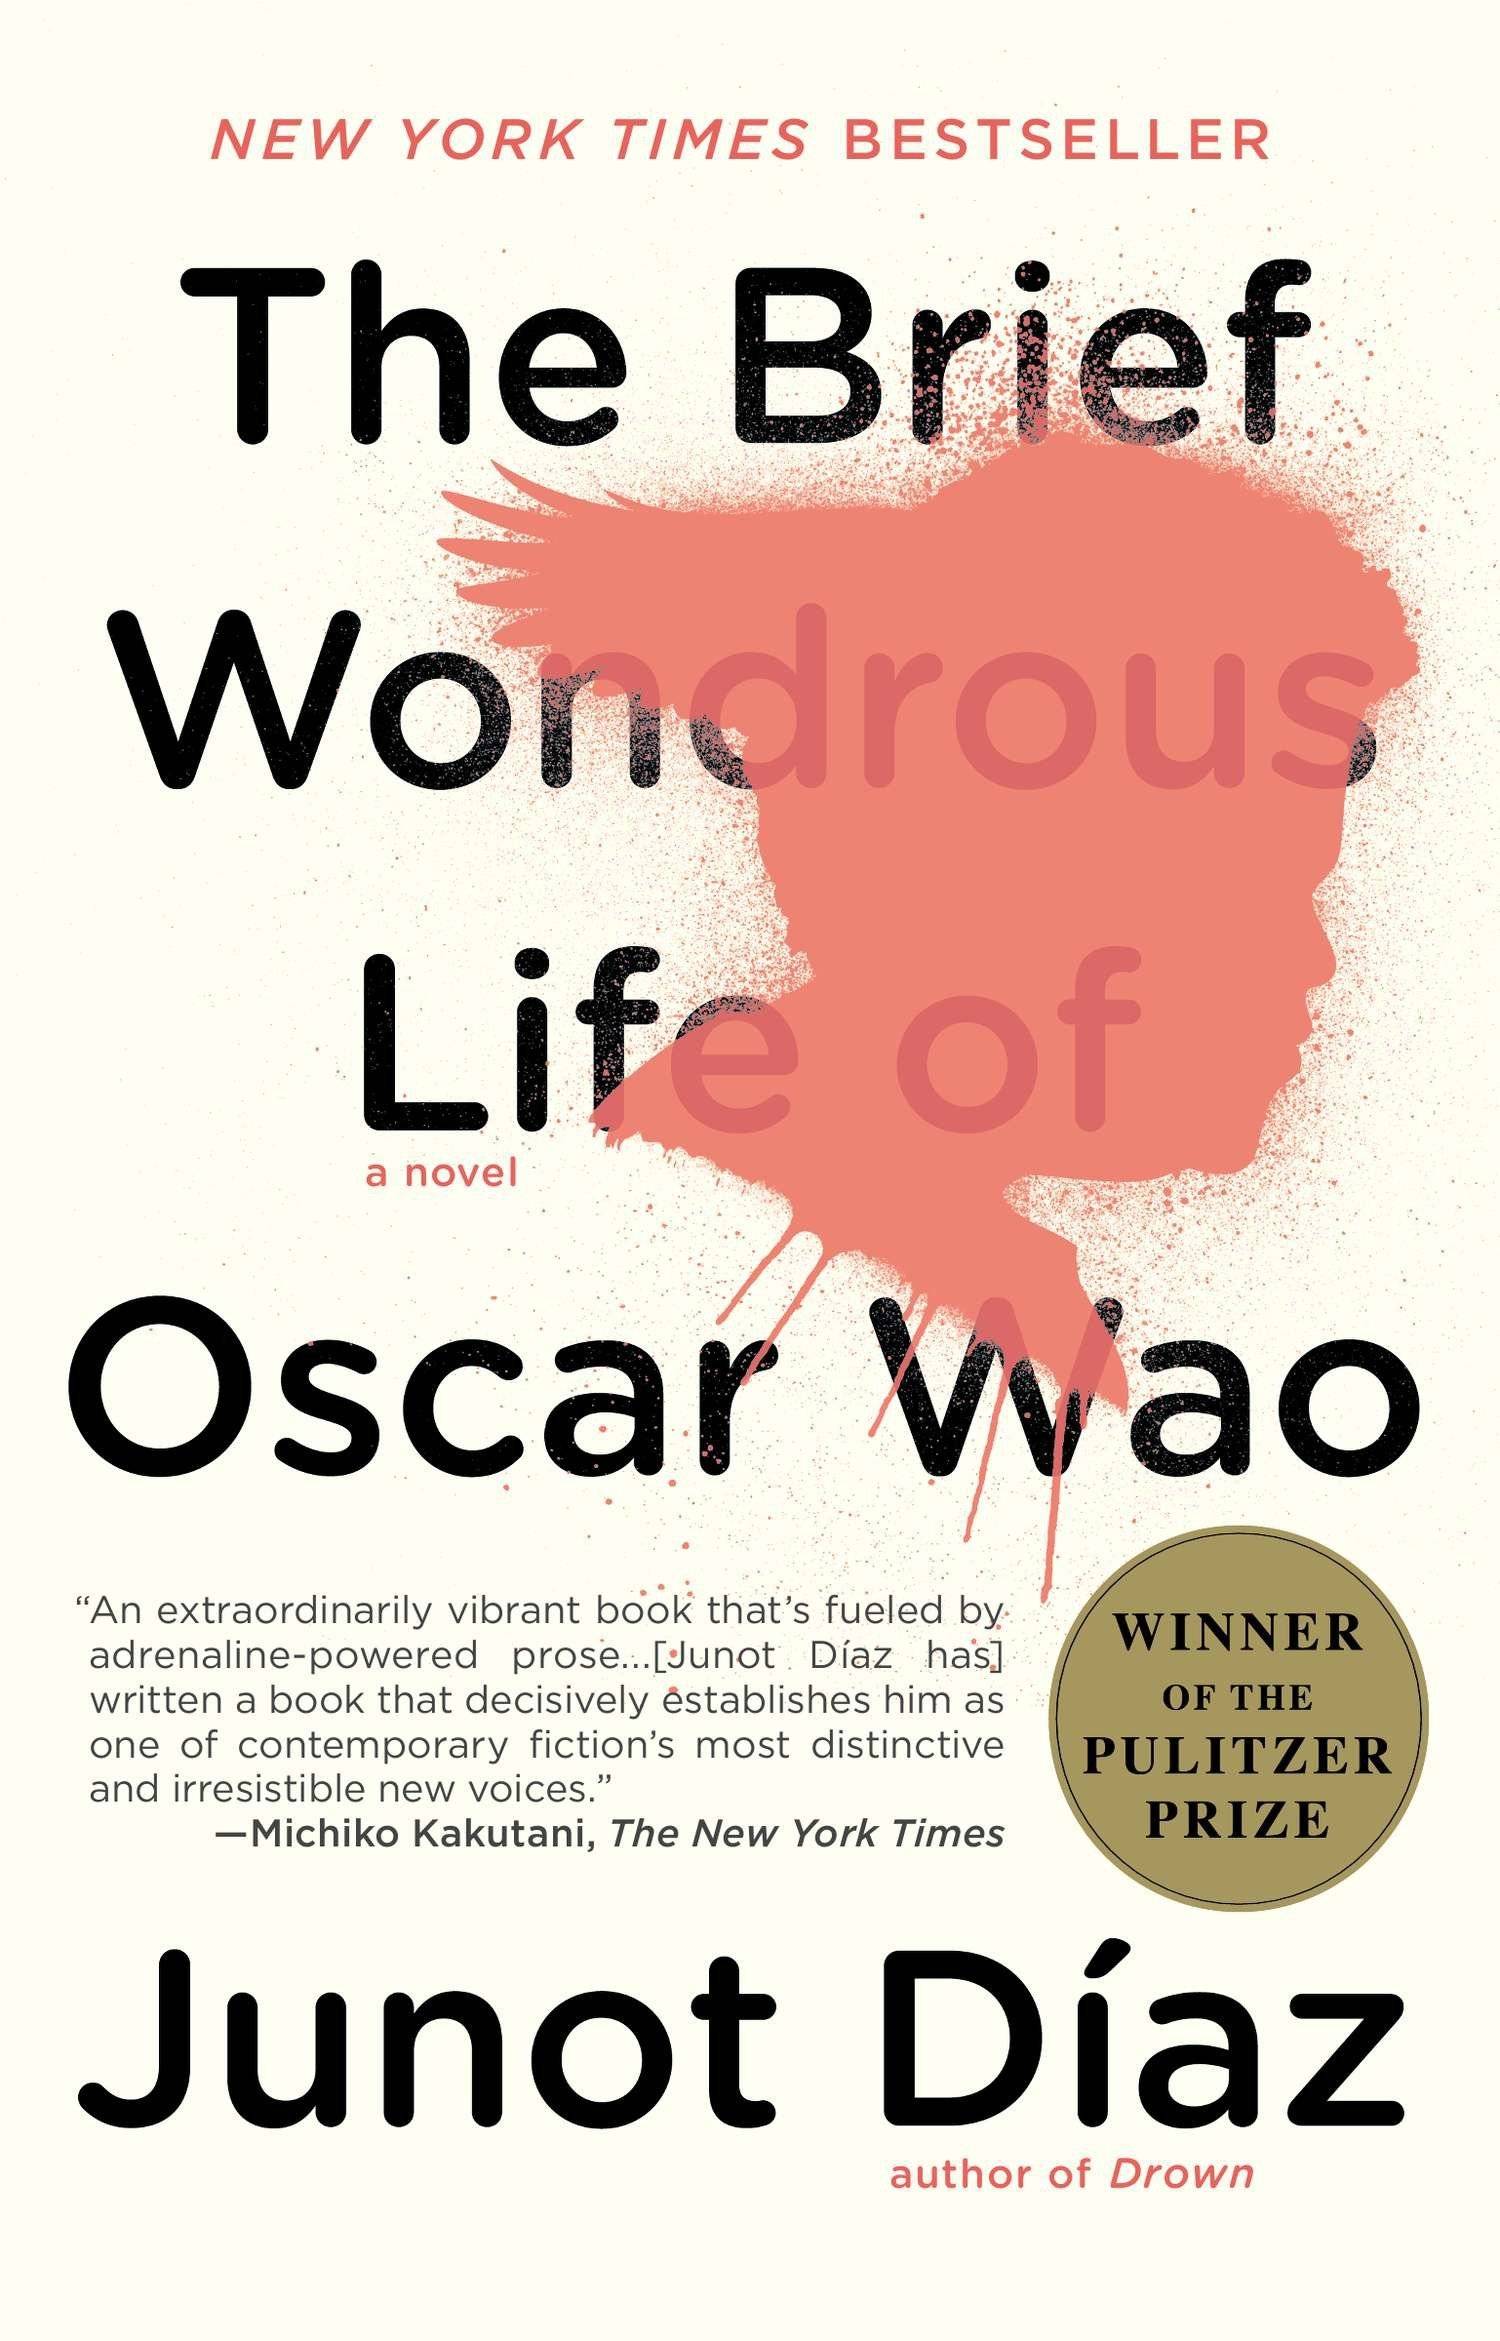 White "The brief wondrous life of Oscar Wao" book cover with black text and orange spray paint silhouette.